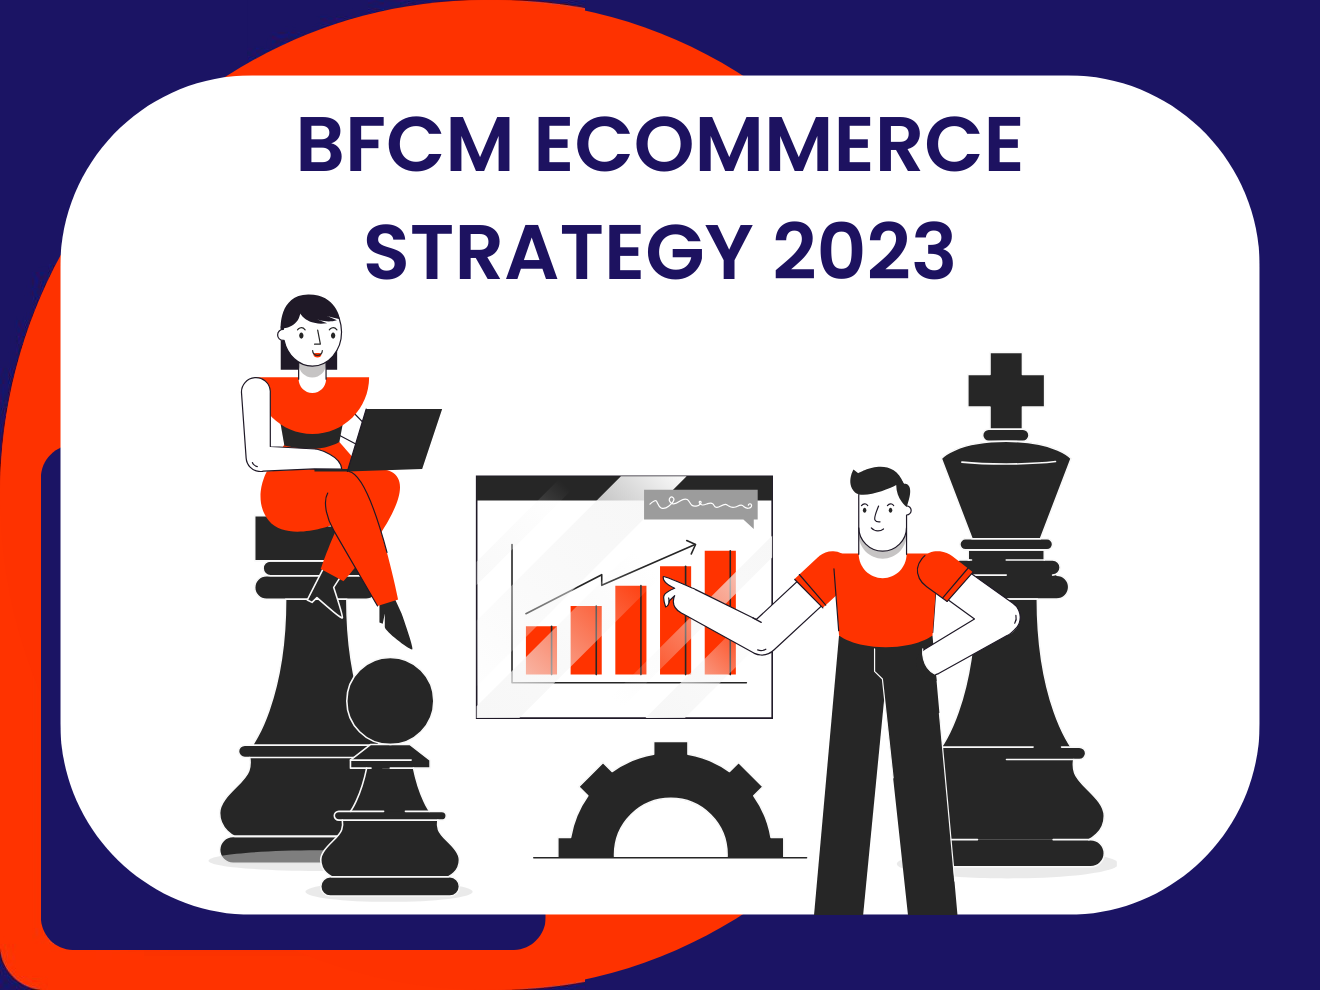 How to Create an effective BFCM eCommerce Strategy 2023